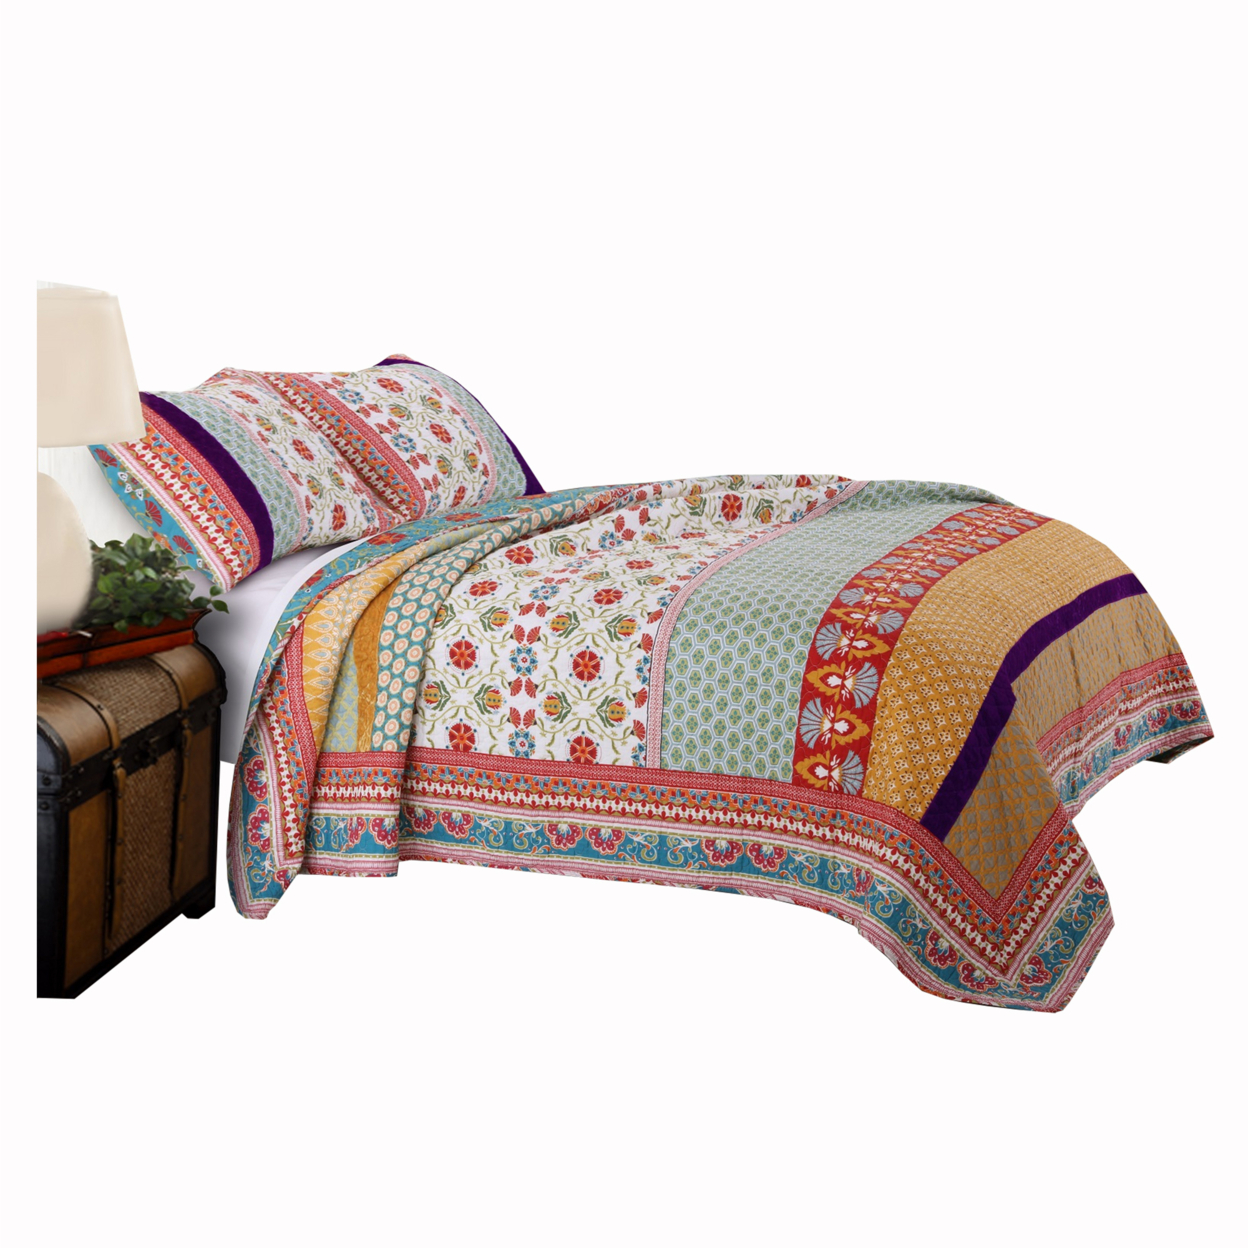 Geometric And Floral Print Twin Size Quilt Set With 1 Sham, Multicolor- Saltoro Sherpi